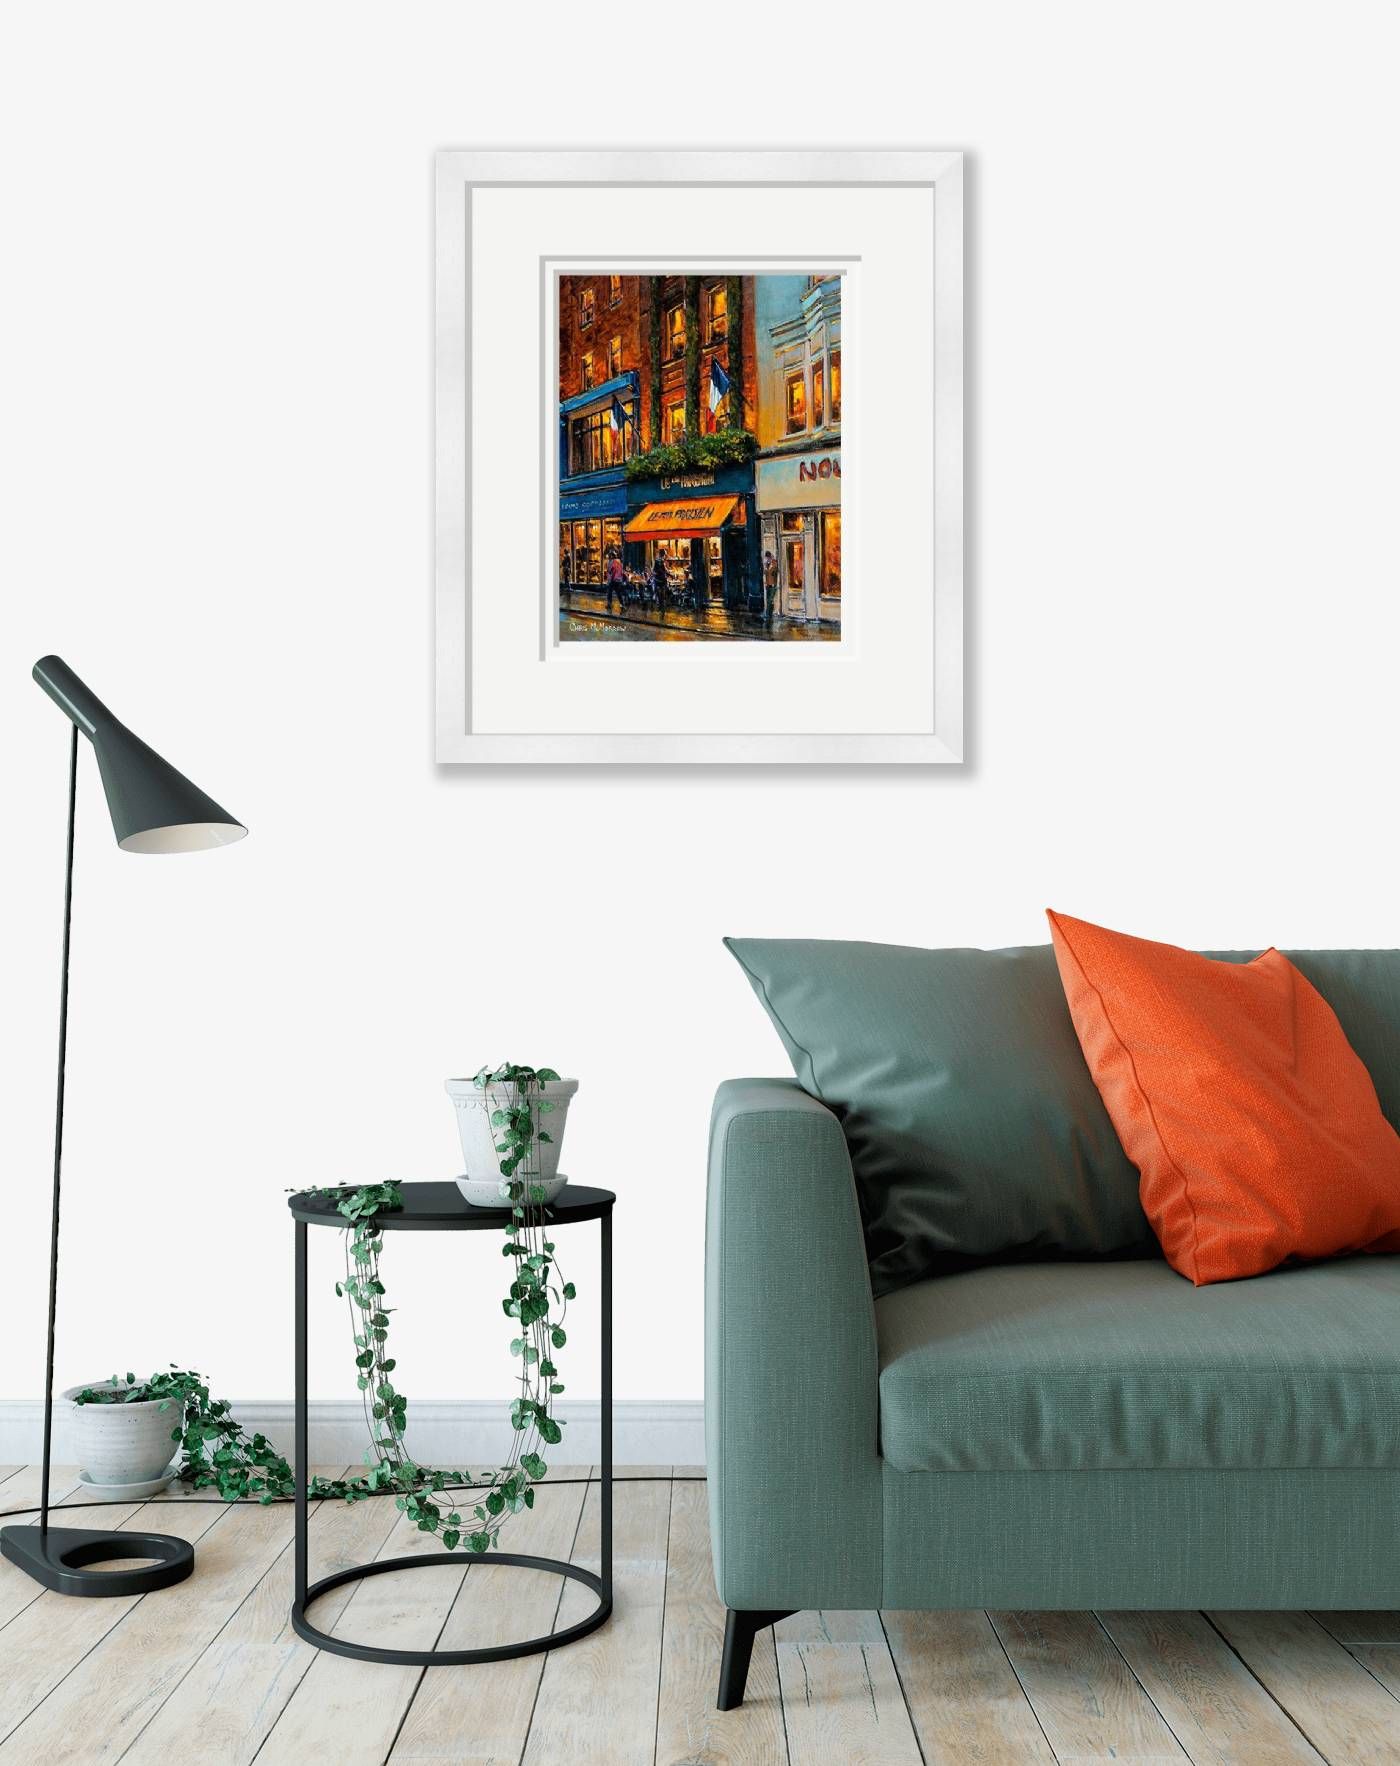 Large framed - Le Petit Parisien Cafe, Wicklow Street, Dublin - 732 by Chris McMorrow